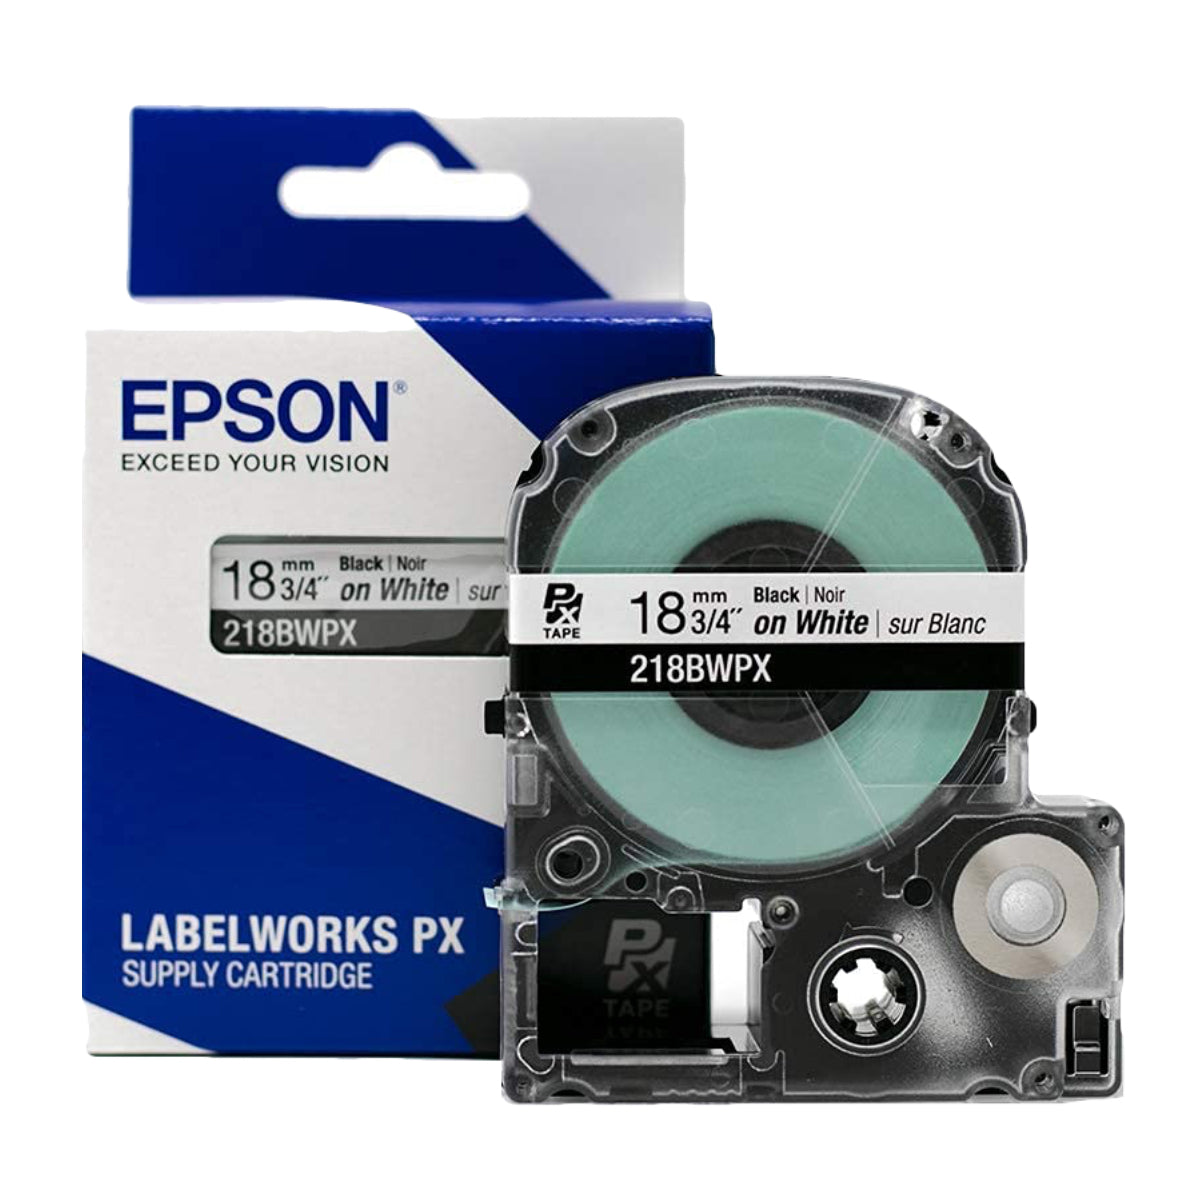 Epson LABELWORKS PX 18mm 218BWPX Tape, Black on White